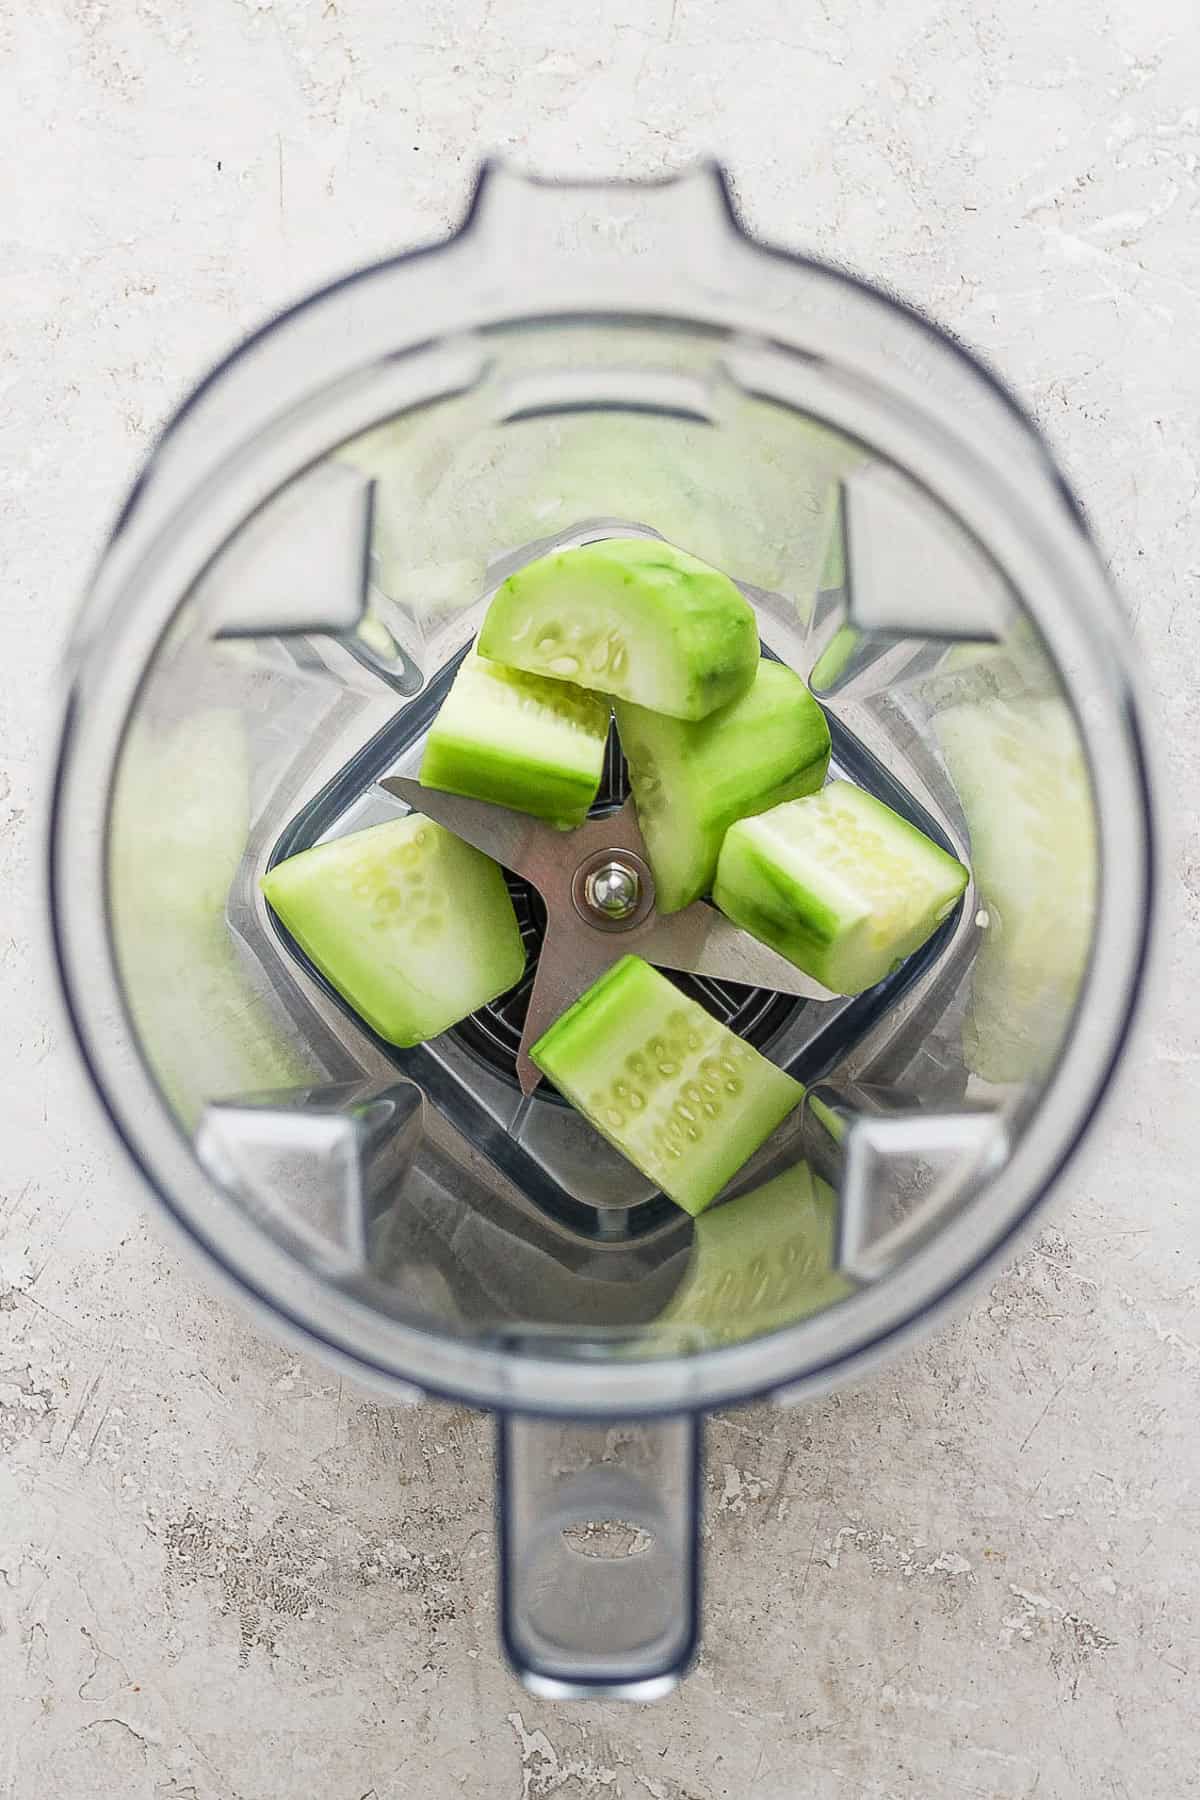 Chunks of peeled and diced cucumbers in a blender.